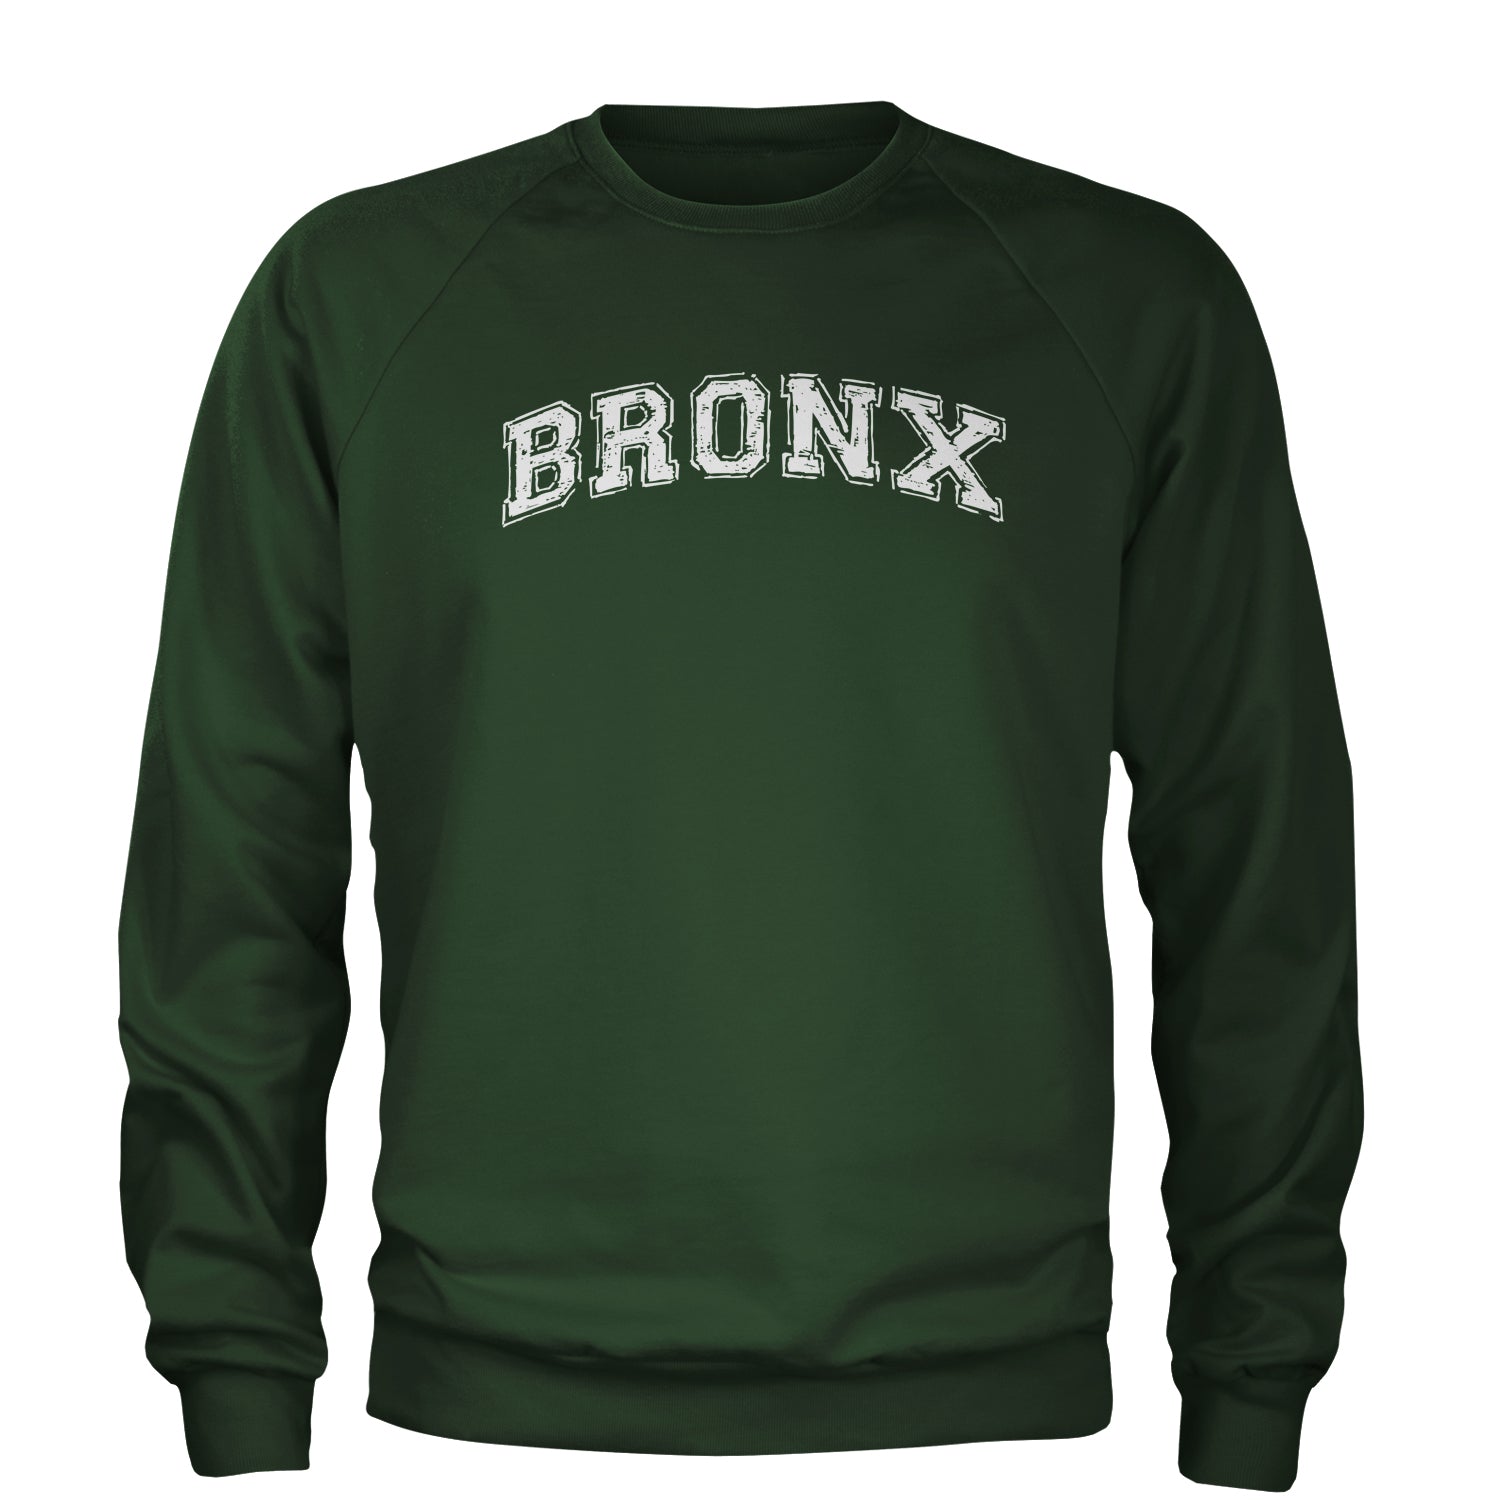 Bronx - From The Block Adult Crewneck Sweatshirt b, cardi, concert, its, Jennifer, lopez, merch, my, party, tour by Expression Tees